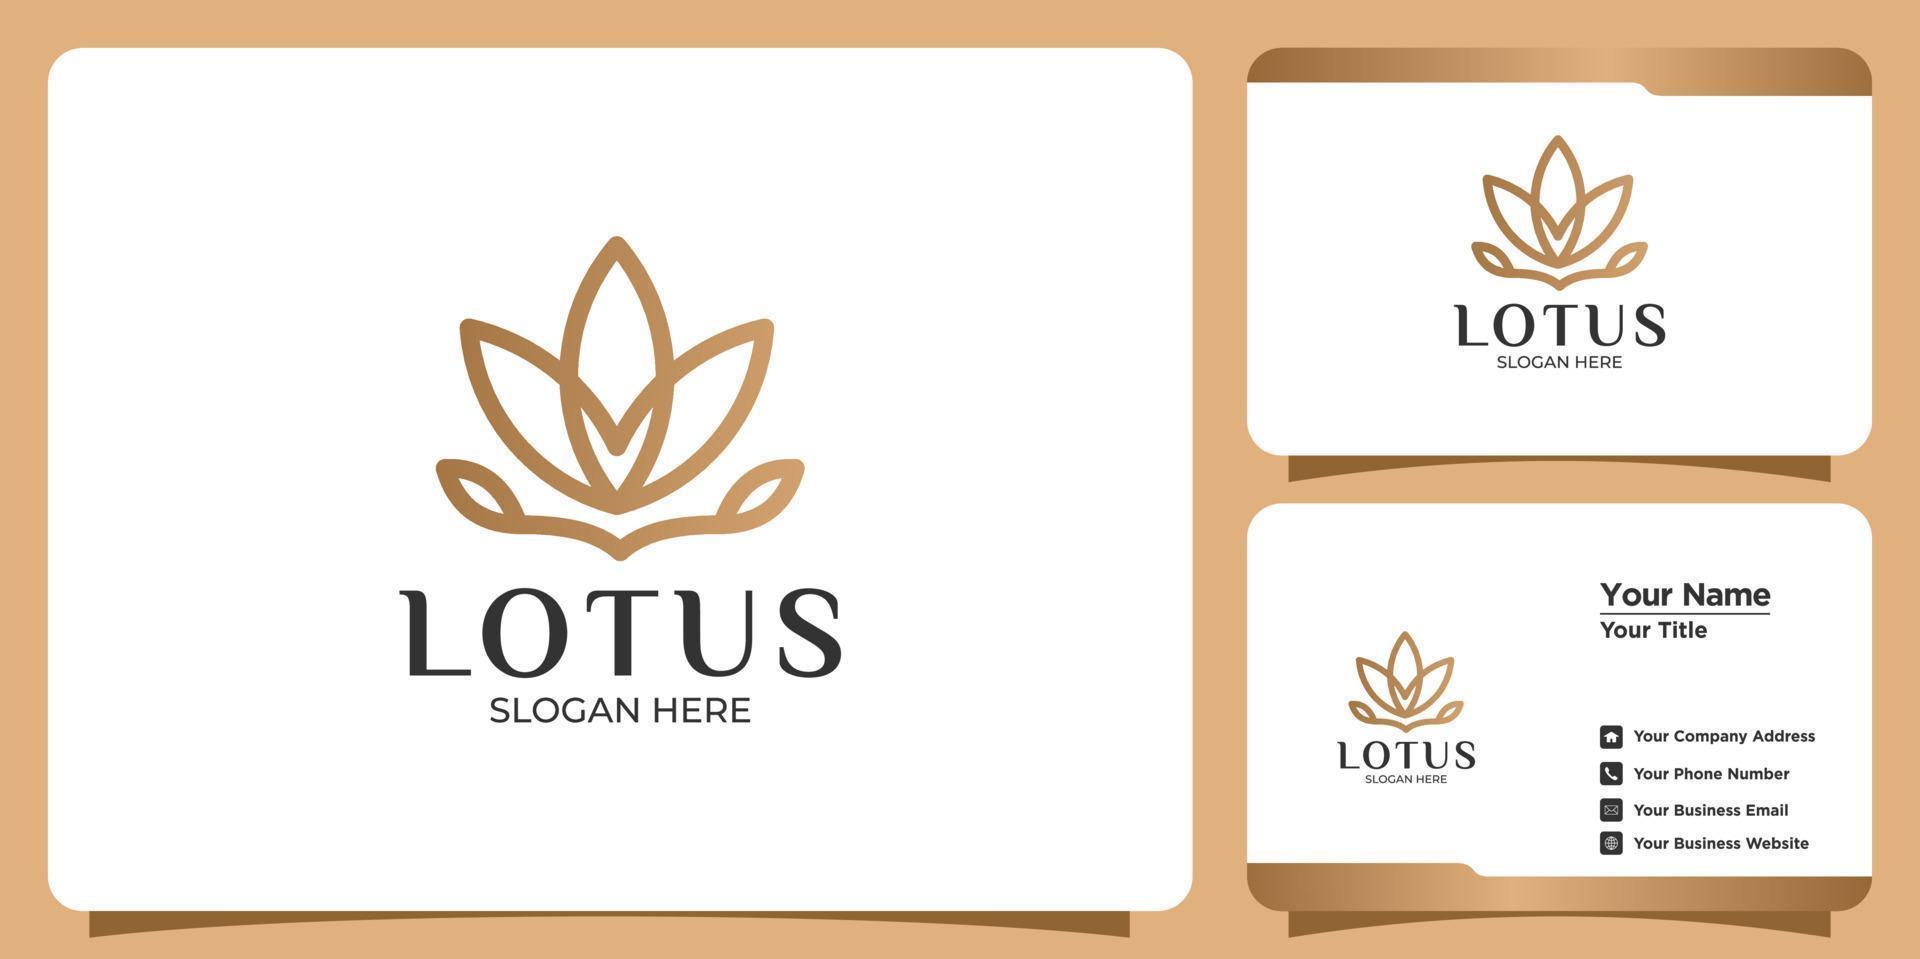 Set of hand drawn lotus flower template logos and business cards vector